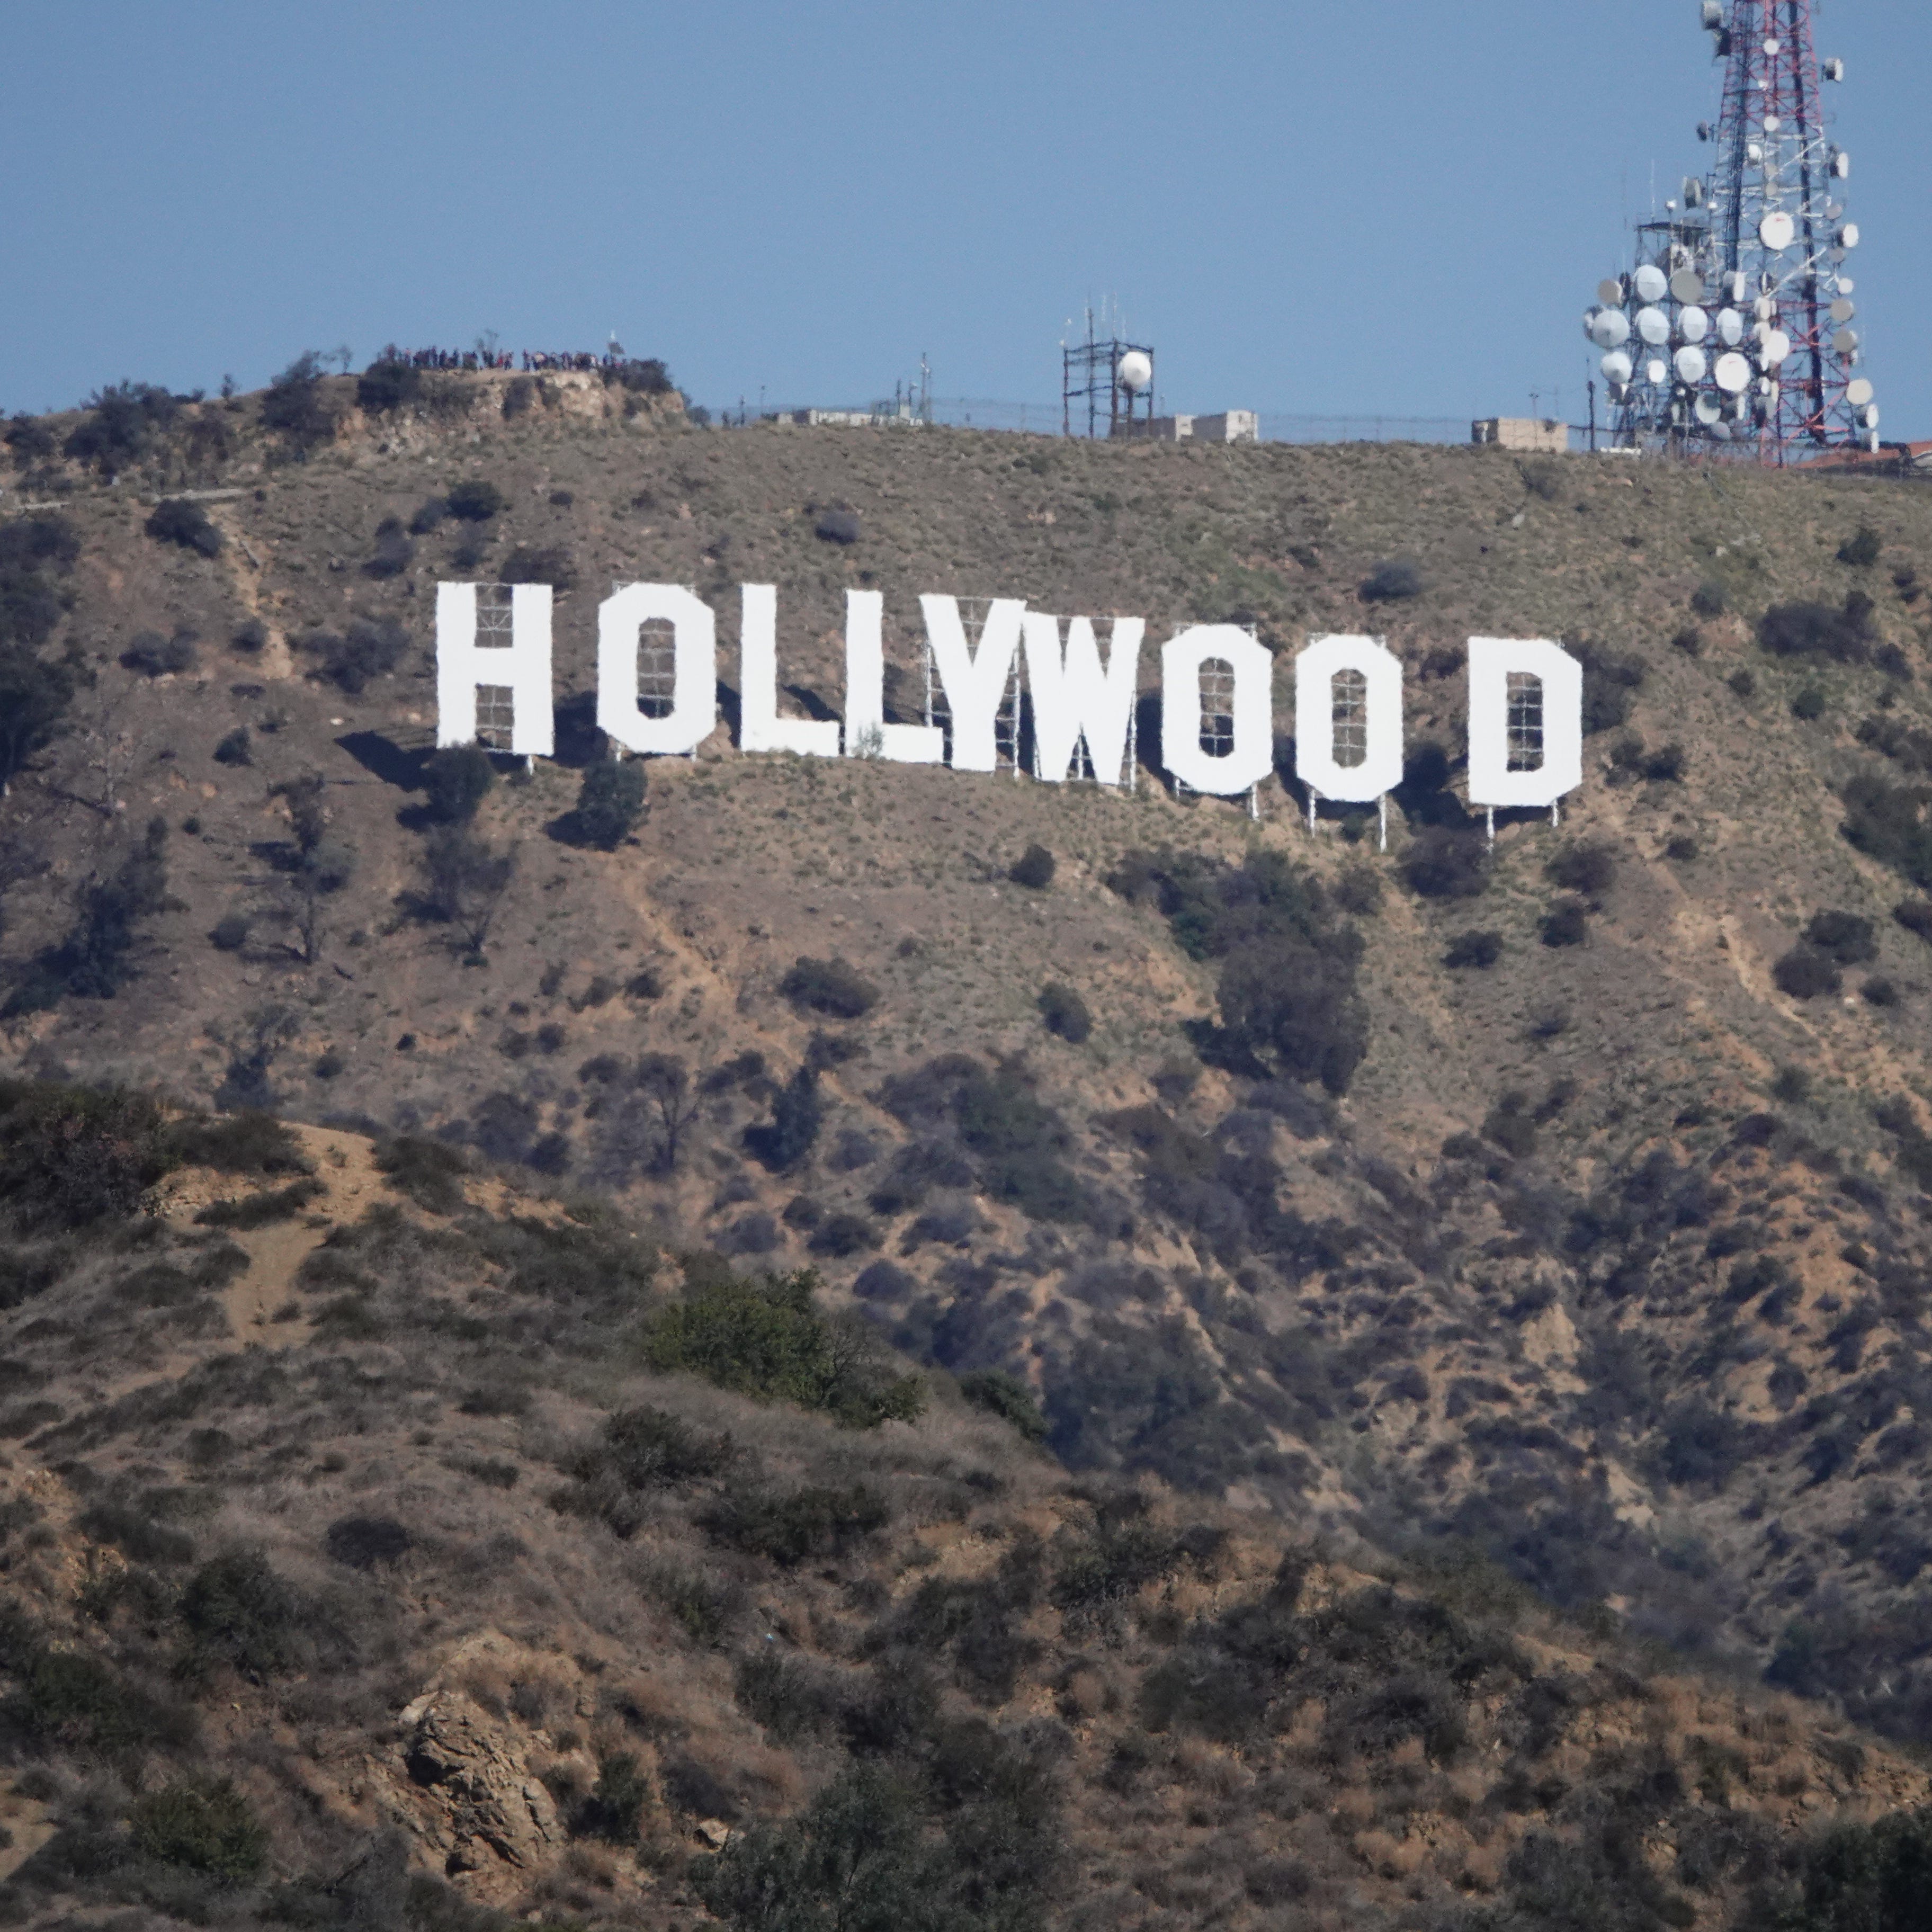 Hollywood sign in Hollywood hills.